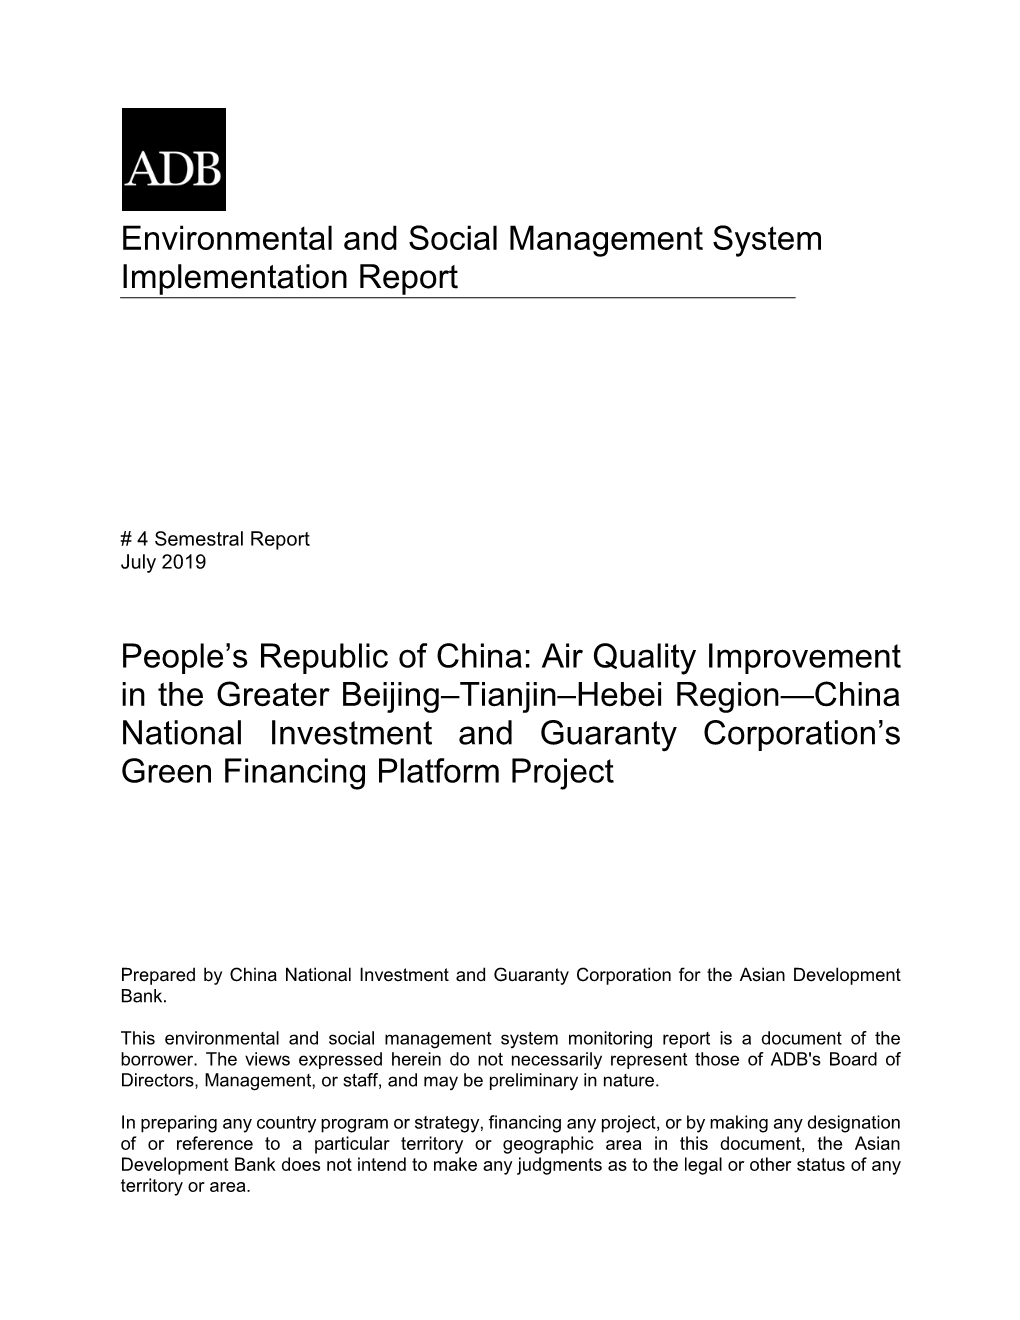 Air Quality Improvement in the Greater Beijing–Tianjin–Hebei Region—China National Investment and Guaranty Corporation’S Green Financing Platform Project